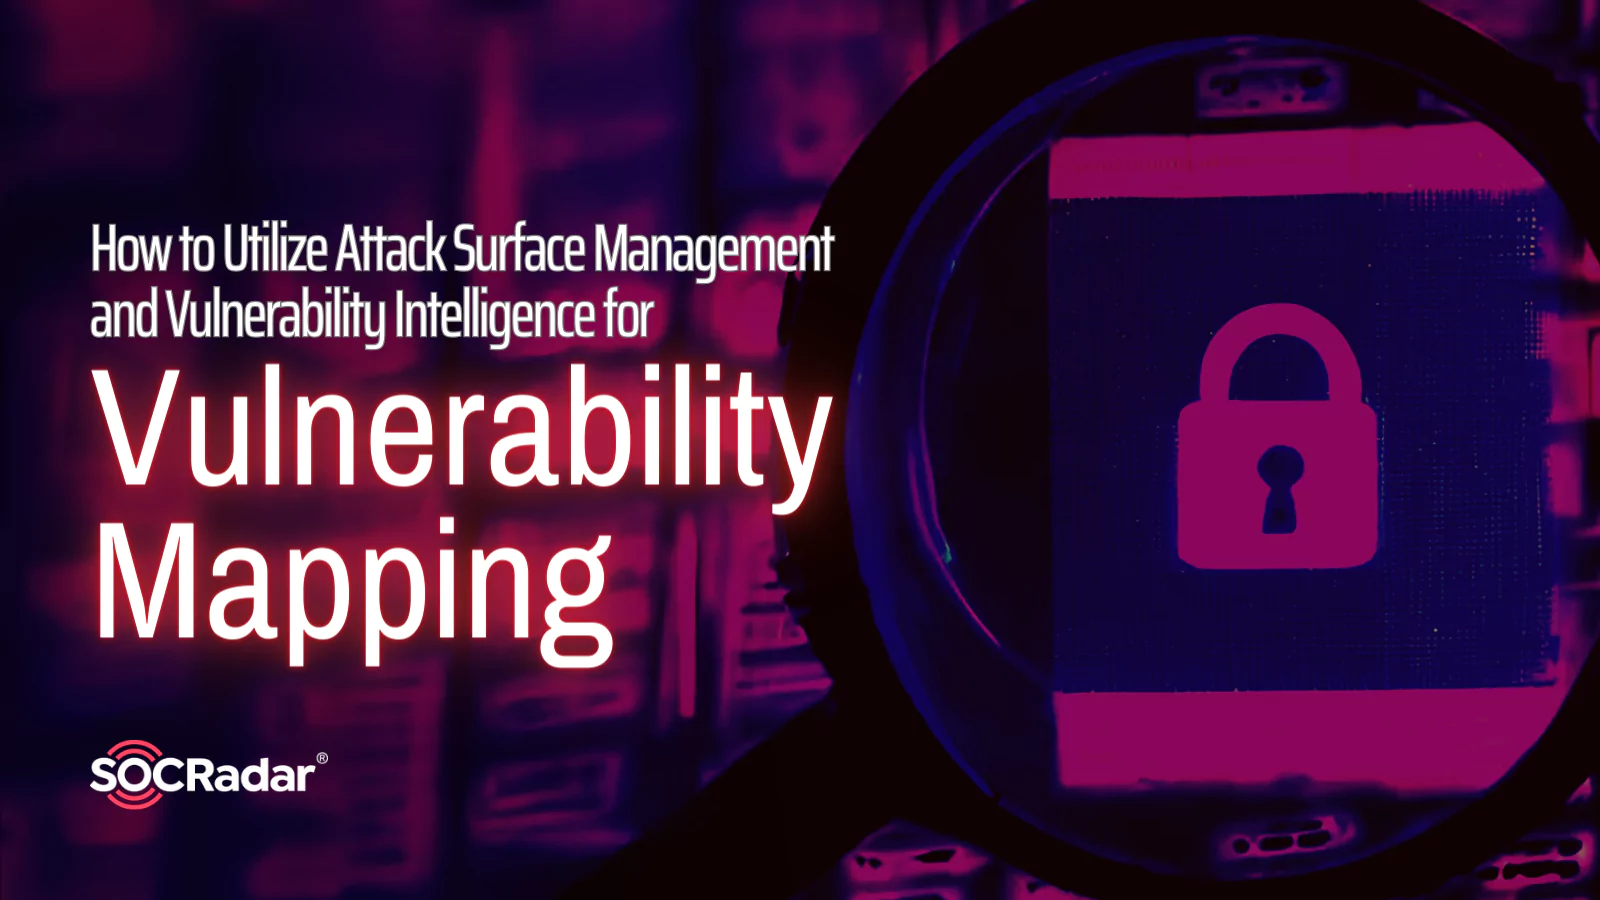 SOCRadar® Cyber Intelligence Inc. | How to Utilize Attack Surface Management and Vulnerability Intelligence for ‘Vulnerability Mapping’